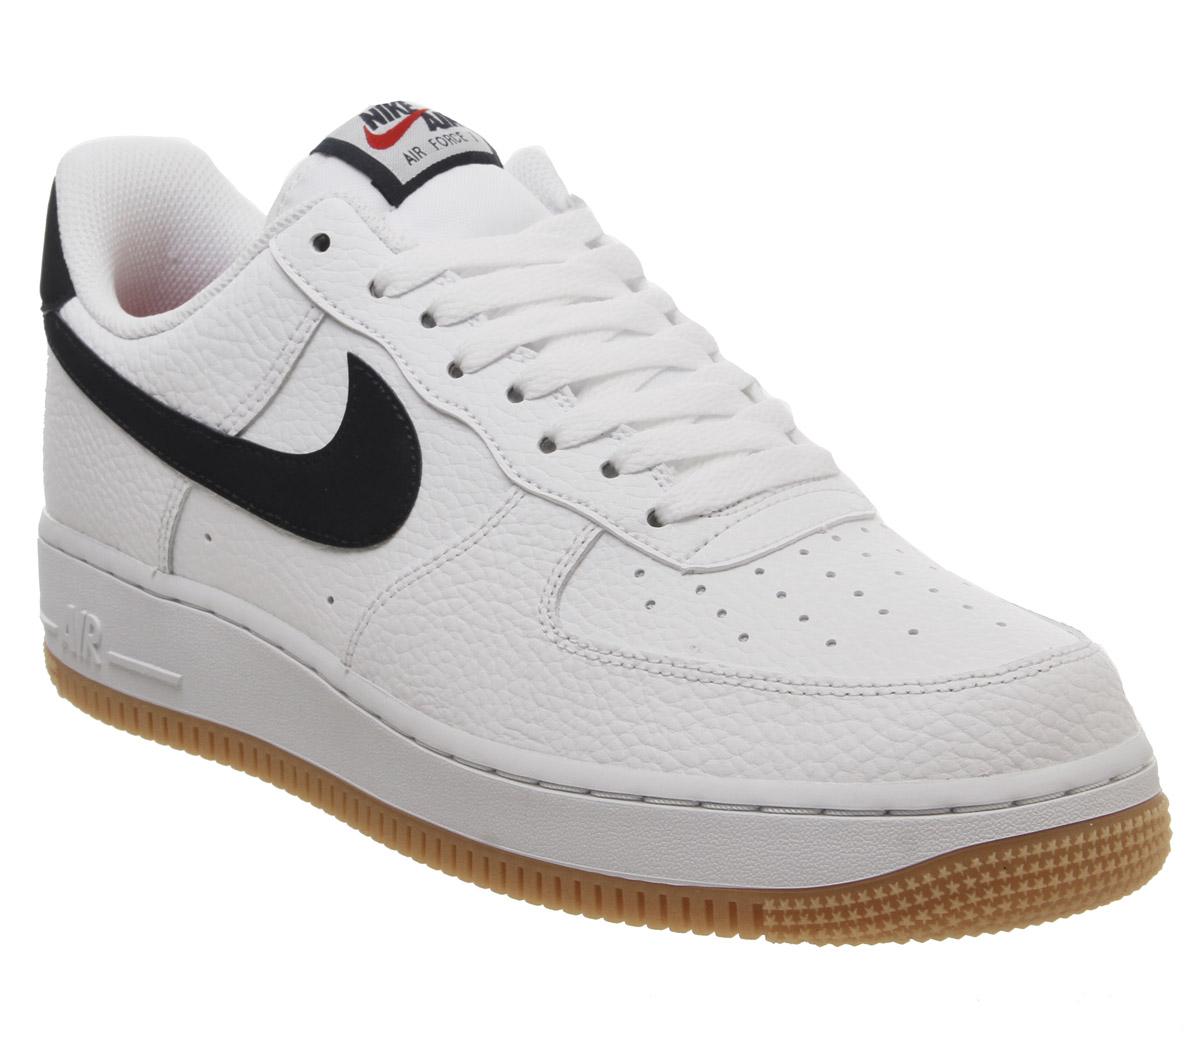 sort air force one gum sole real 38100 